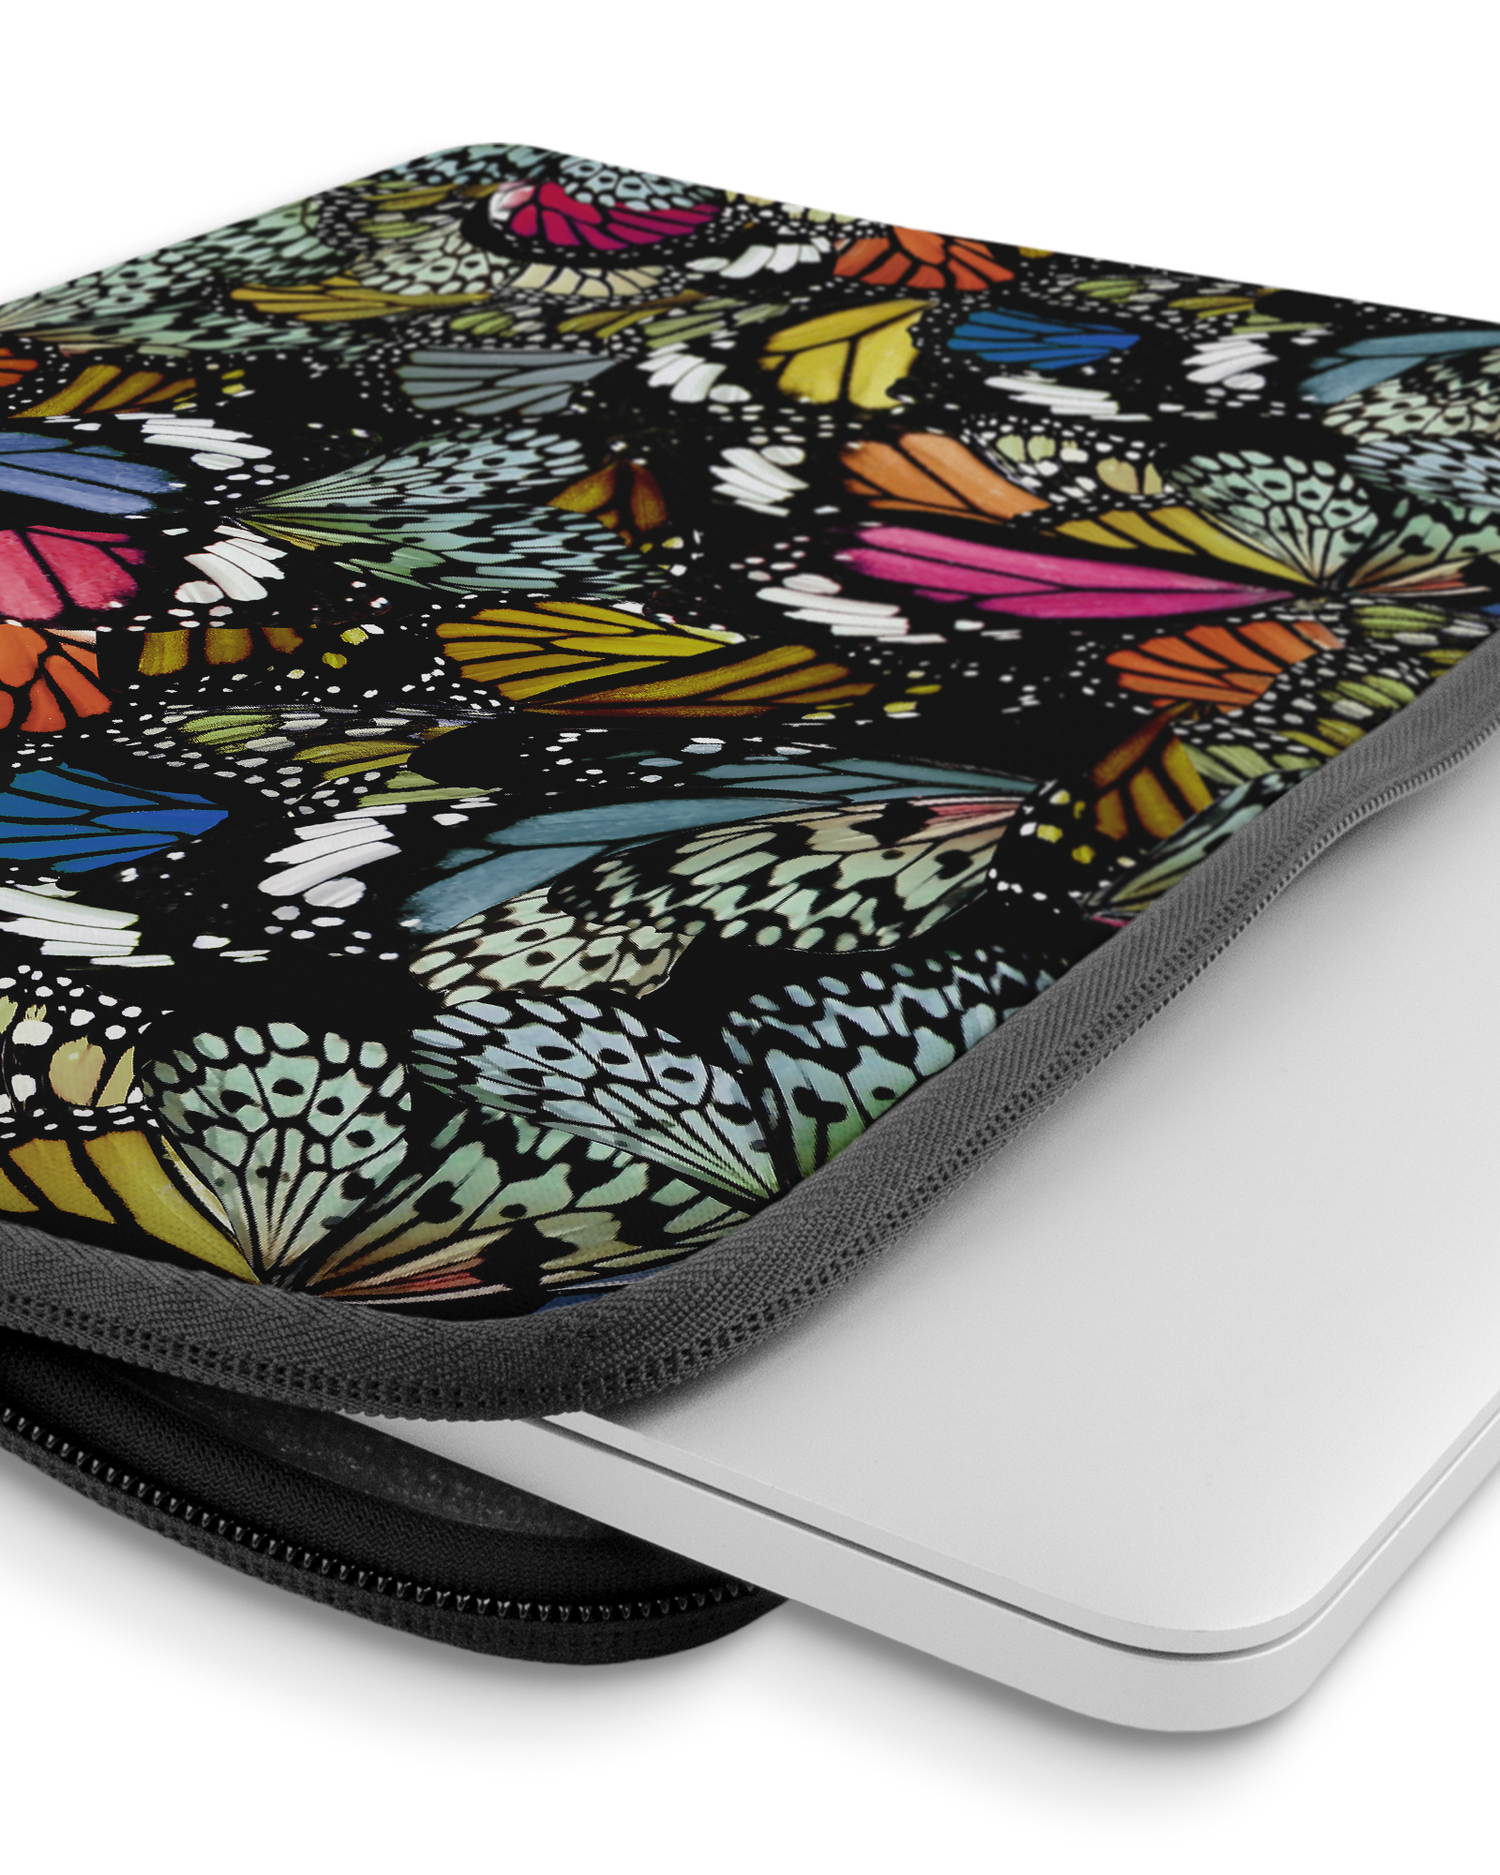 Psychedelic Butterflies Laptop Case 14 inch with device inside